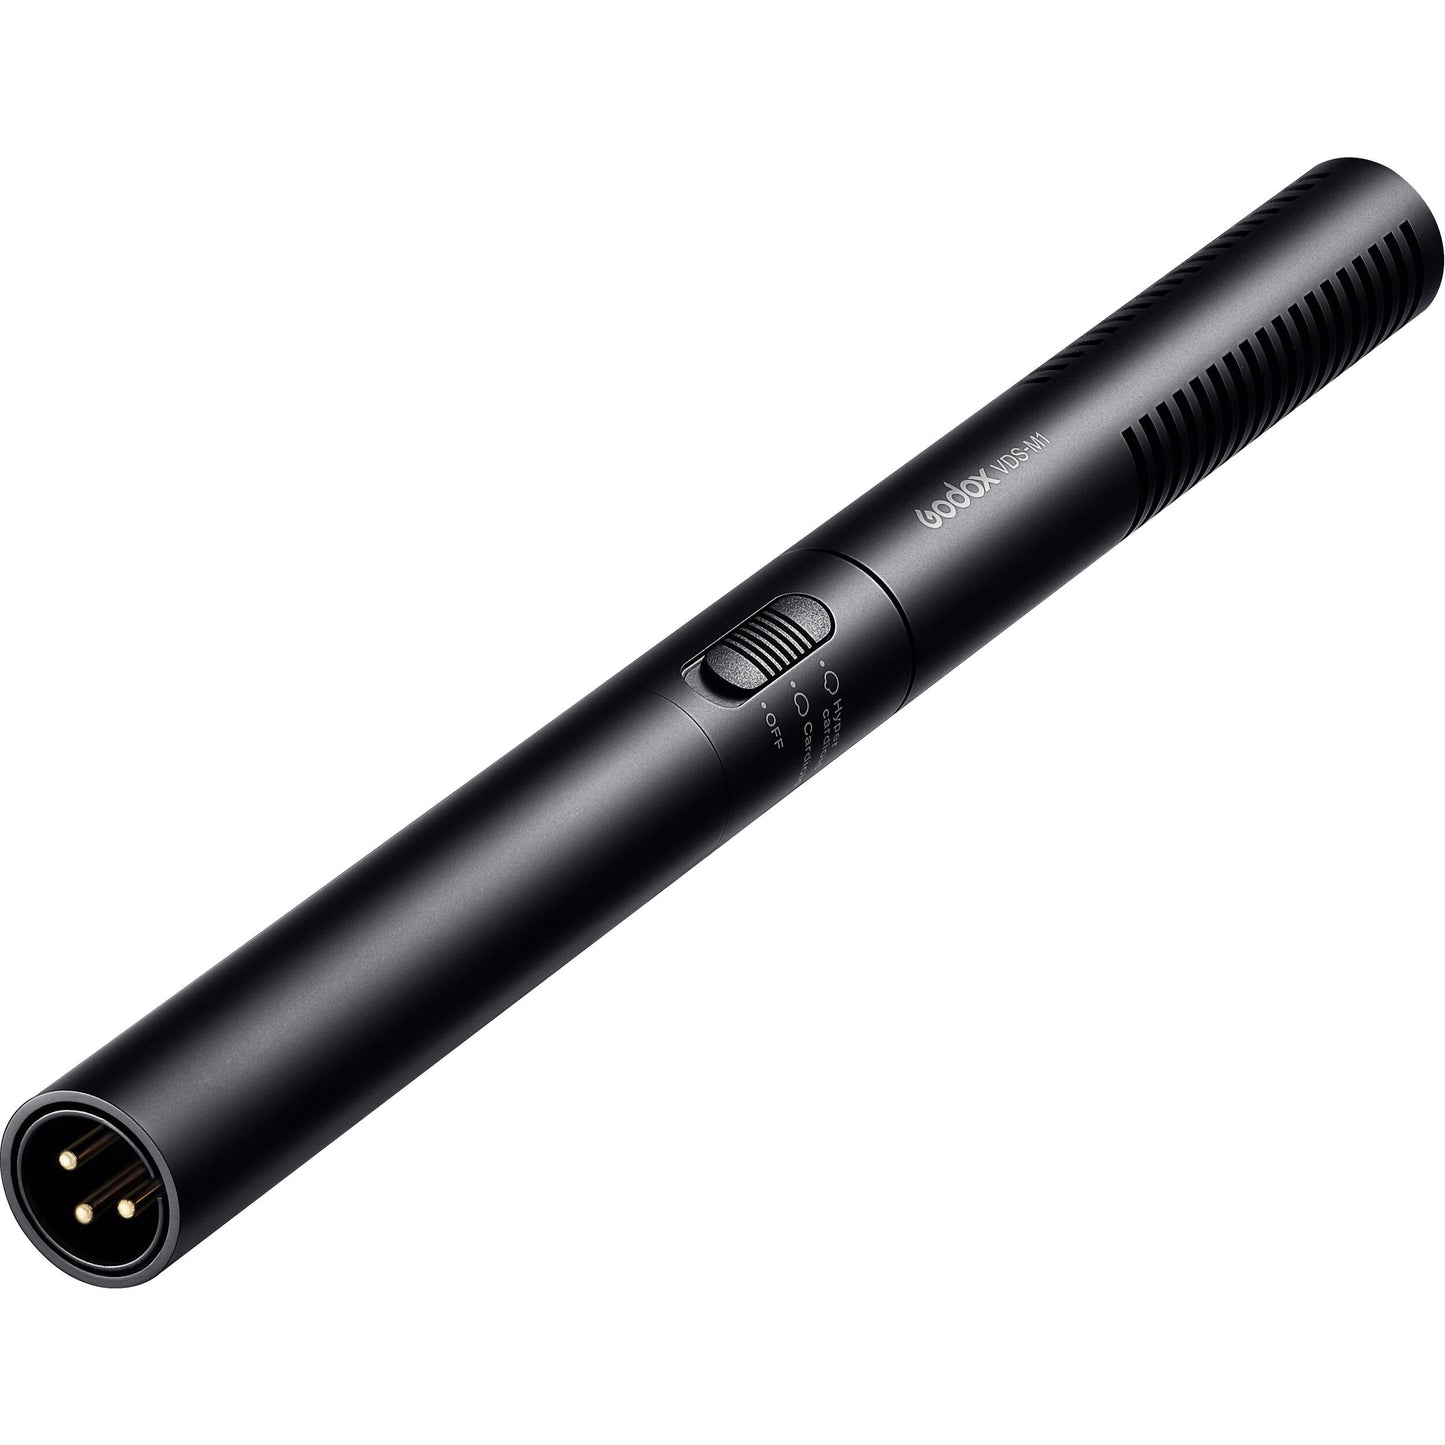 Godox VDS-M1 Shotgun Microphone Multipattern (Cardioid / Supercardioid) with Lightweight Metal Housing and Windscreen